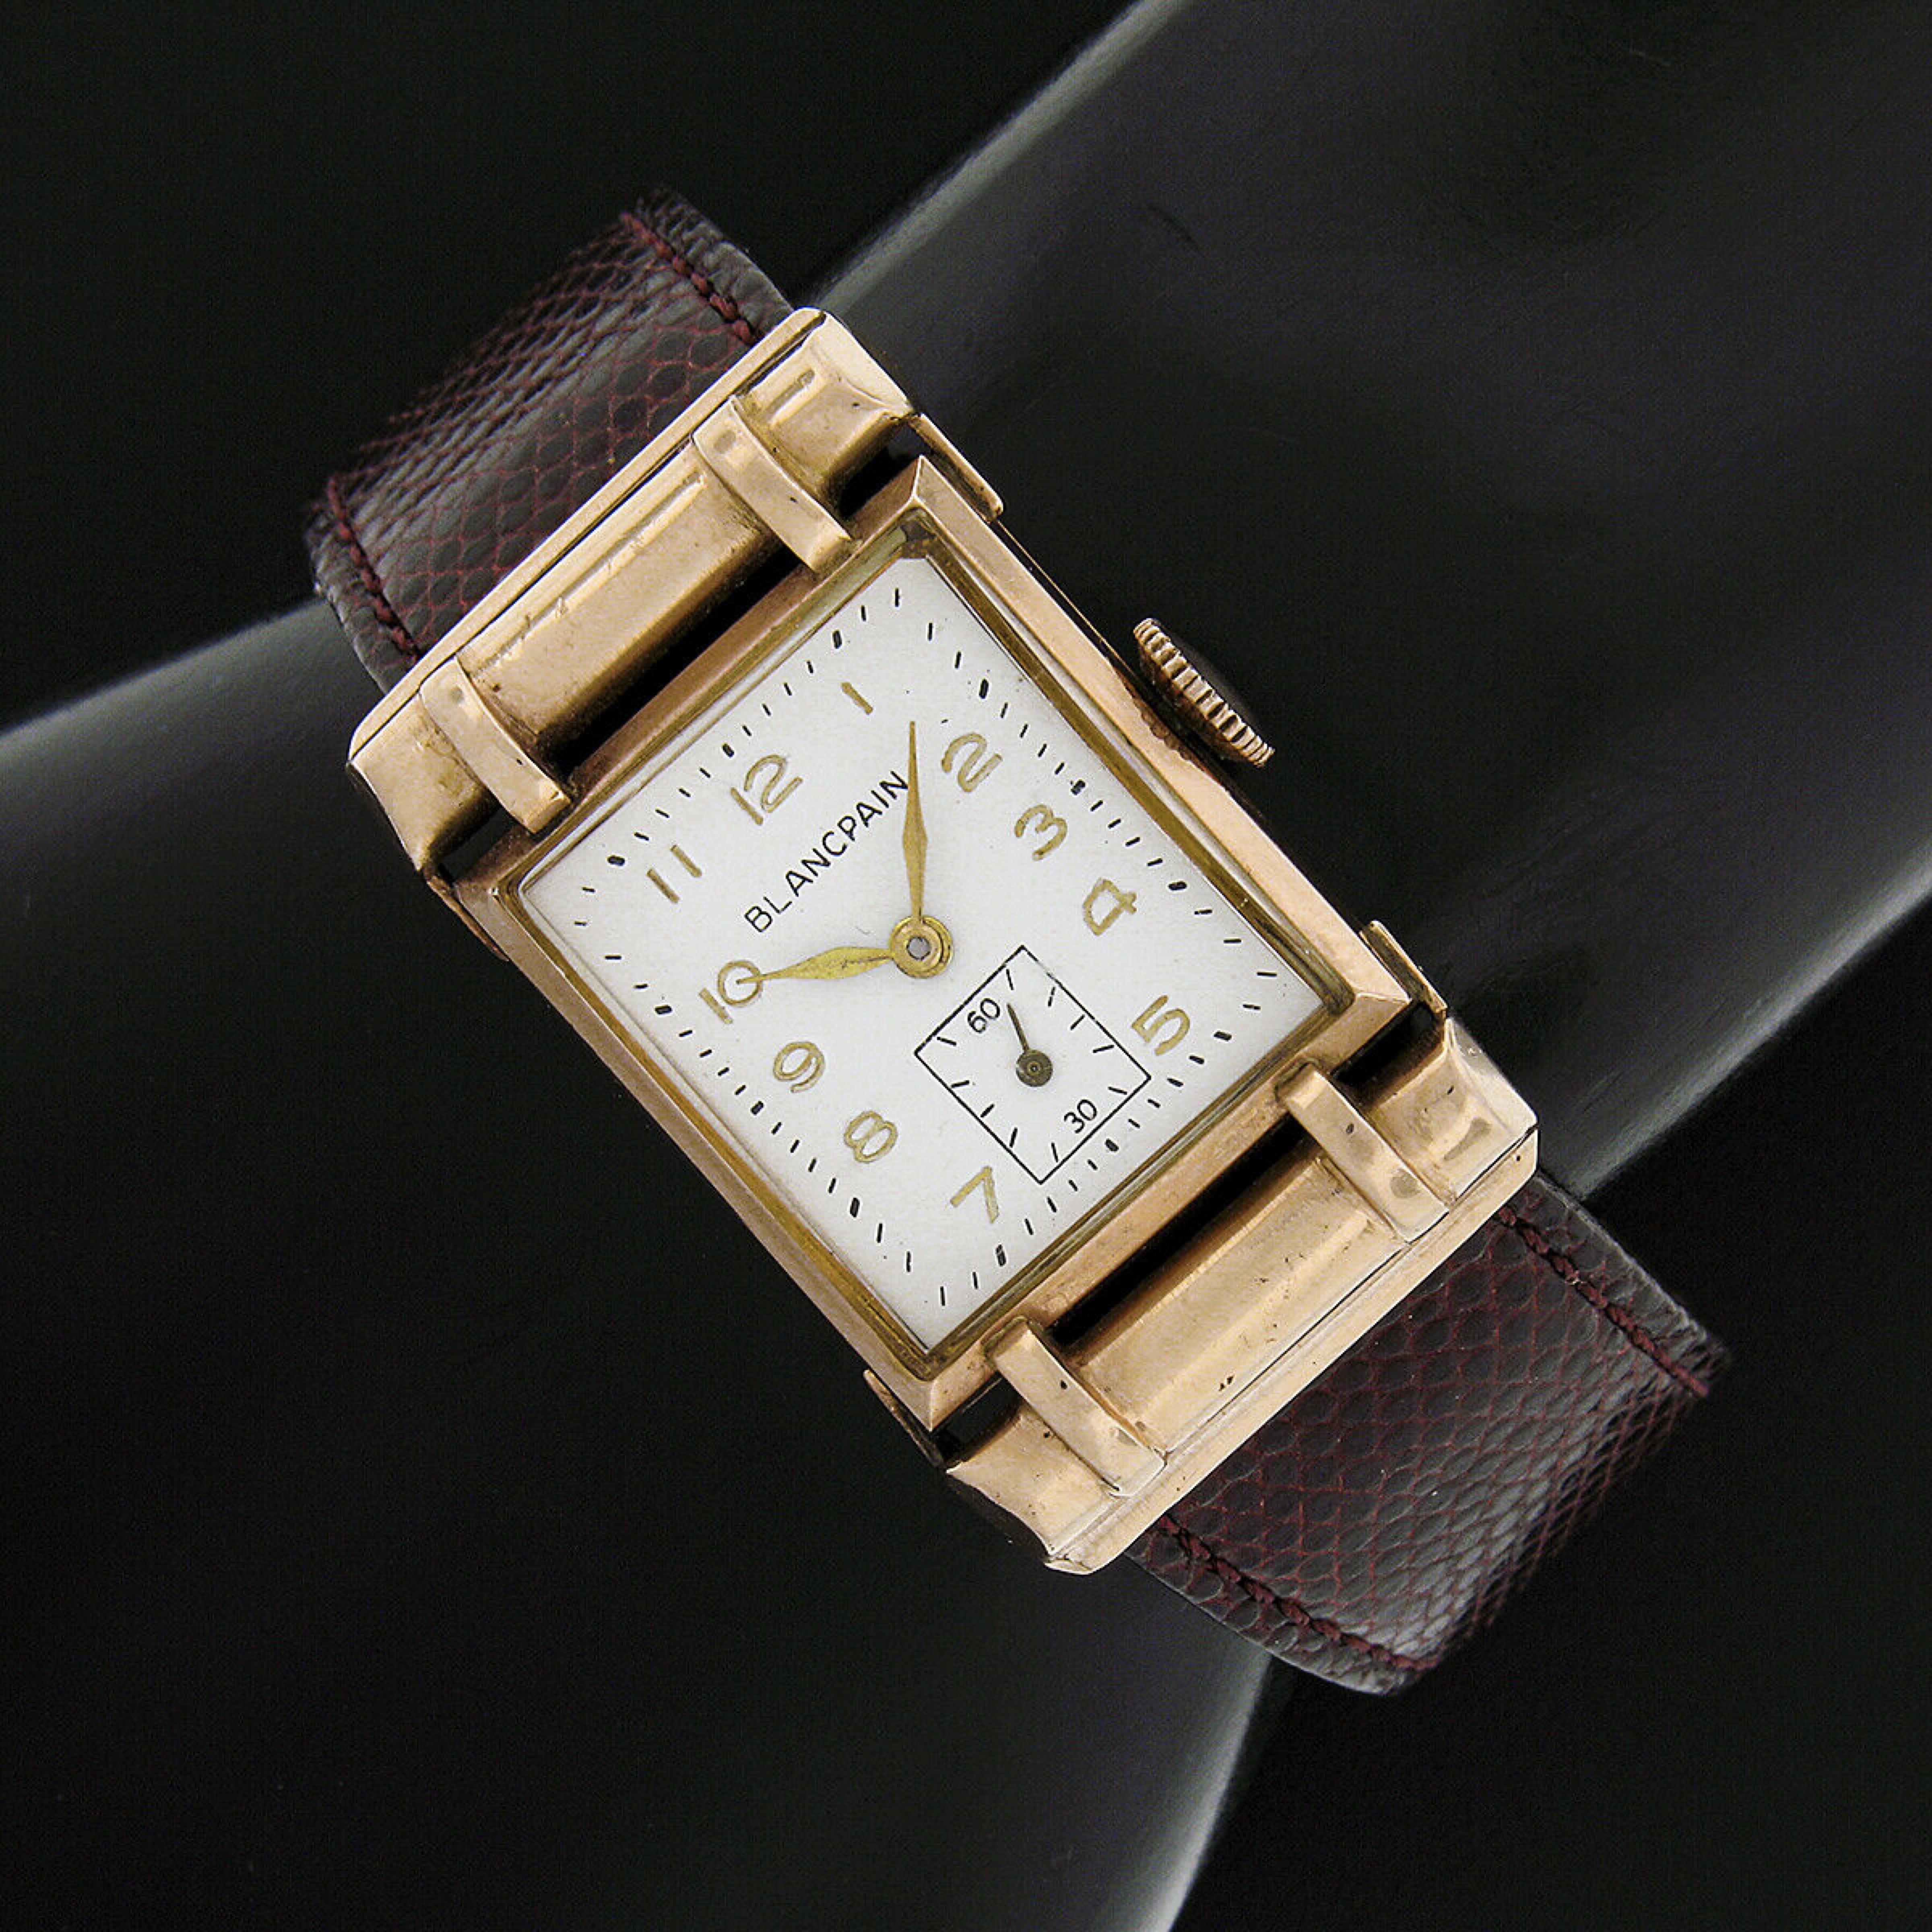 Here we have a classy vintage Blancpain wrist watch featuring its original hand winding movement that continues to keep accurate time. The movement is mounted in a solid 14k rose gold rectangular case that has been lightly polished. The case is